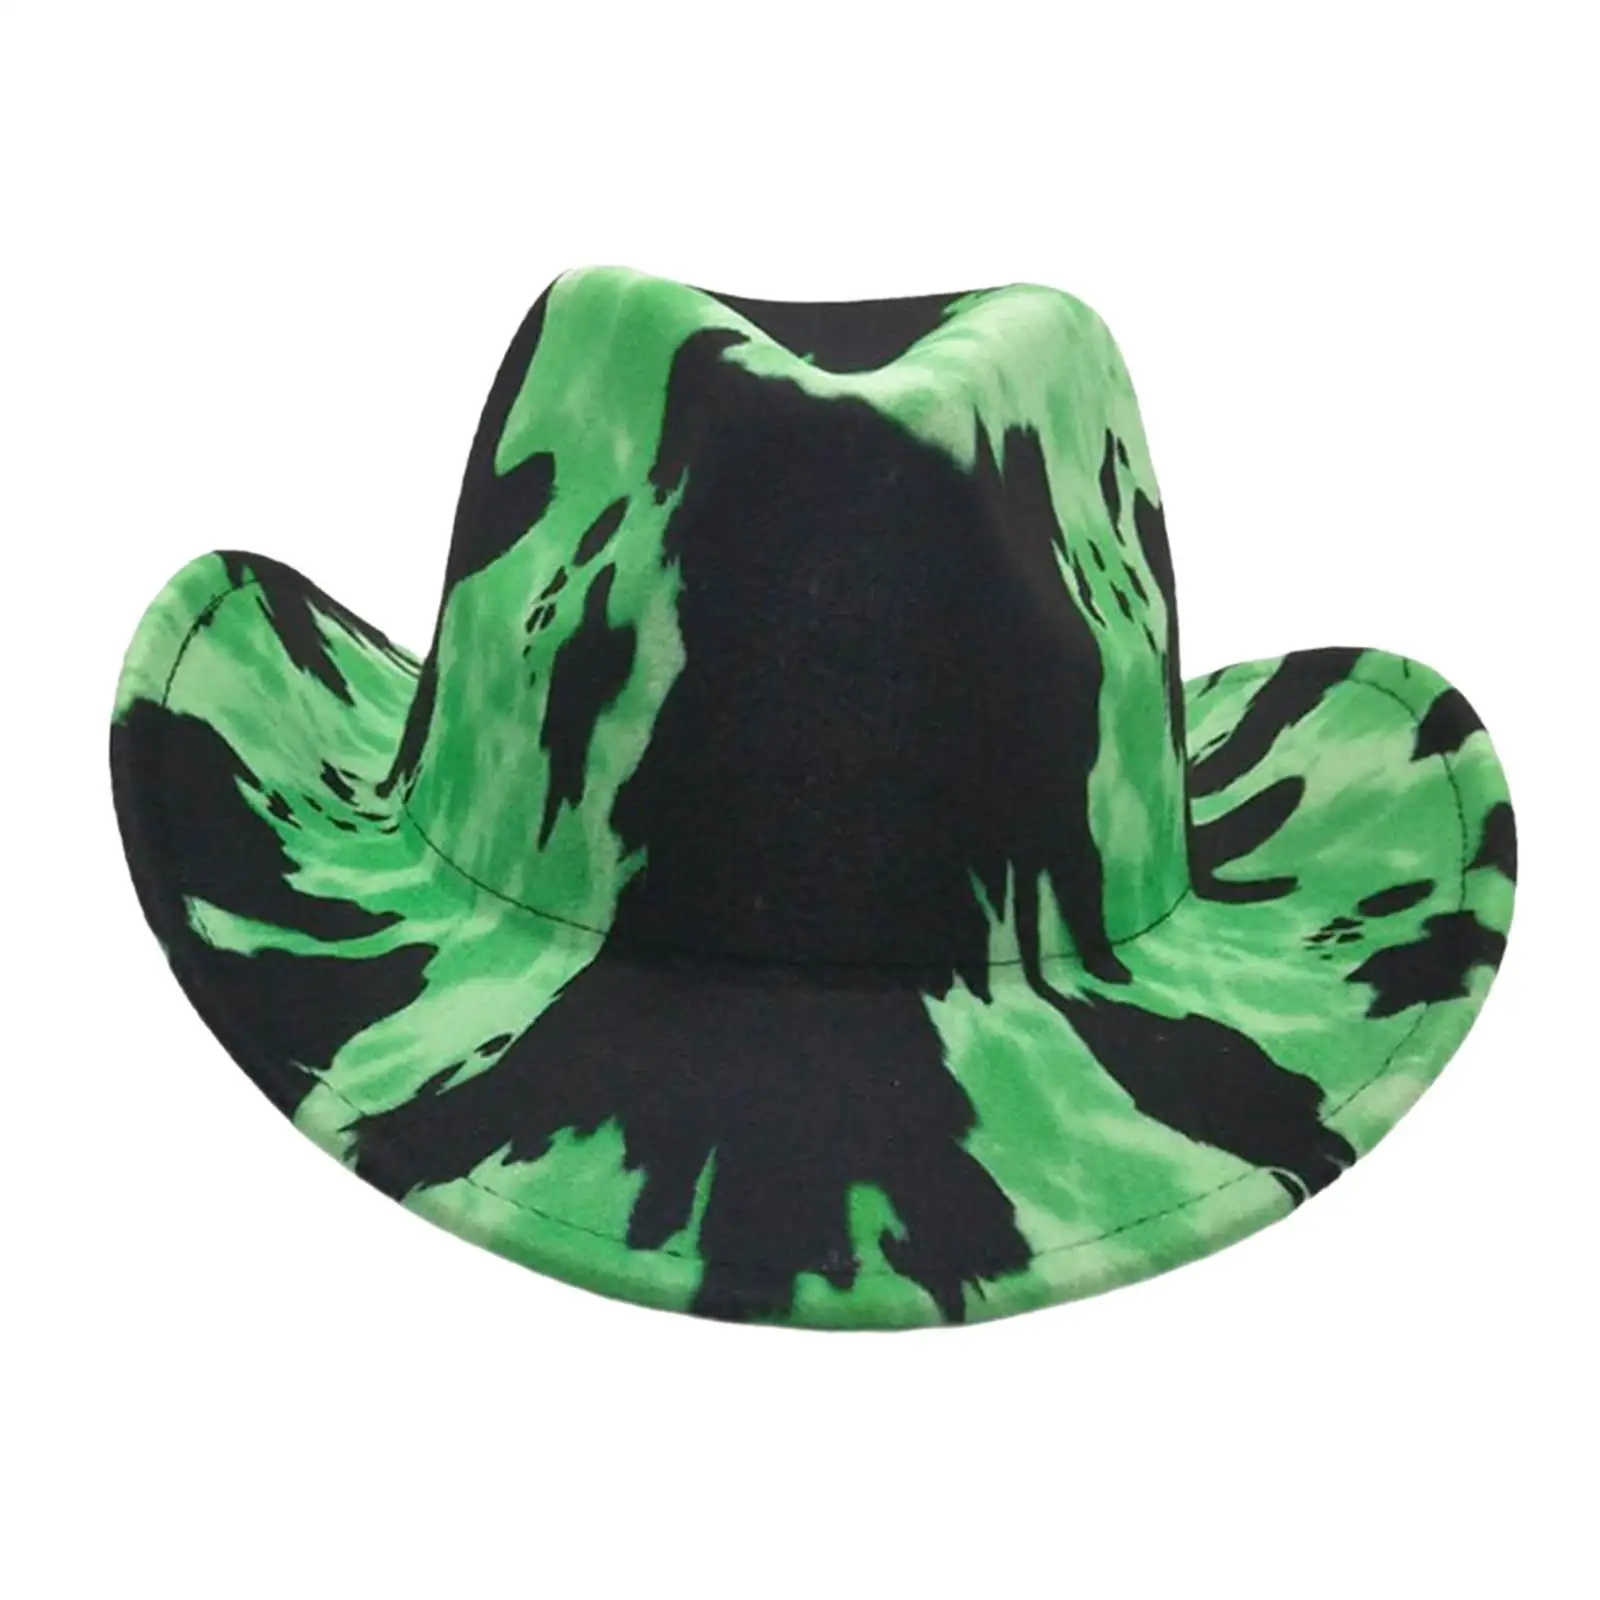 Cowboy Hat Cow Print Party Hats Costume Accessories Wide Brim Hats Womens Hats with Brim for Festival Halloween Adults Men Women